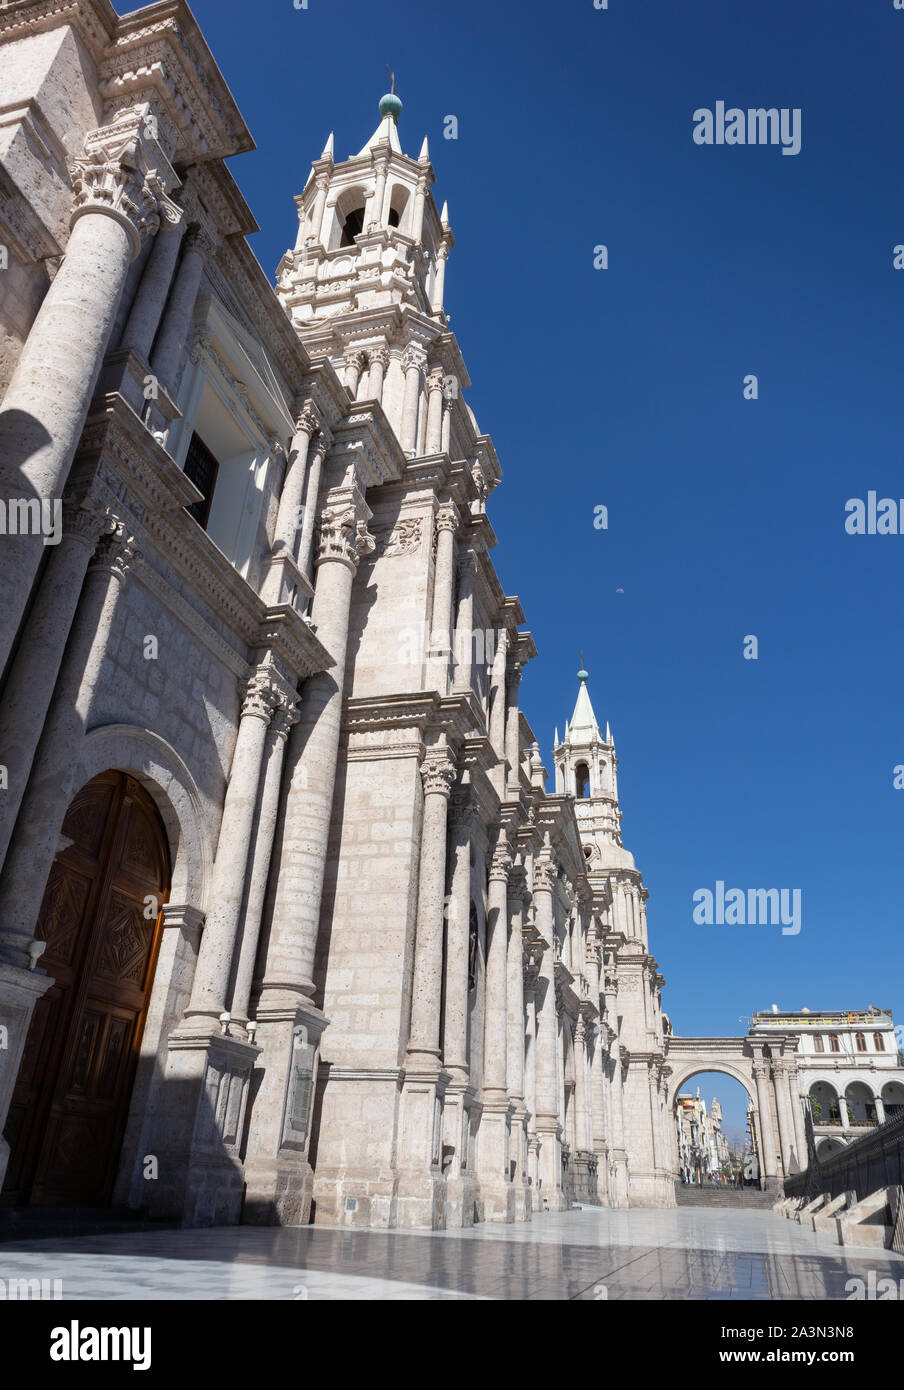 Architecture of a iconic place at Arequipa city, Plaza de Armas Stock Photo